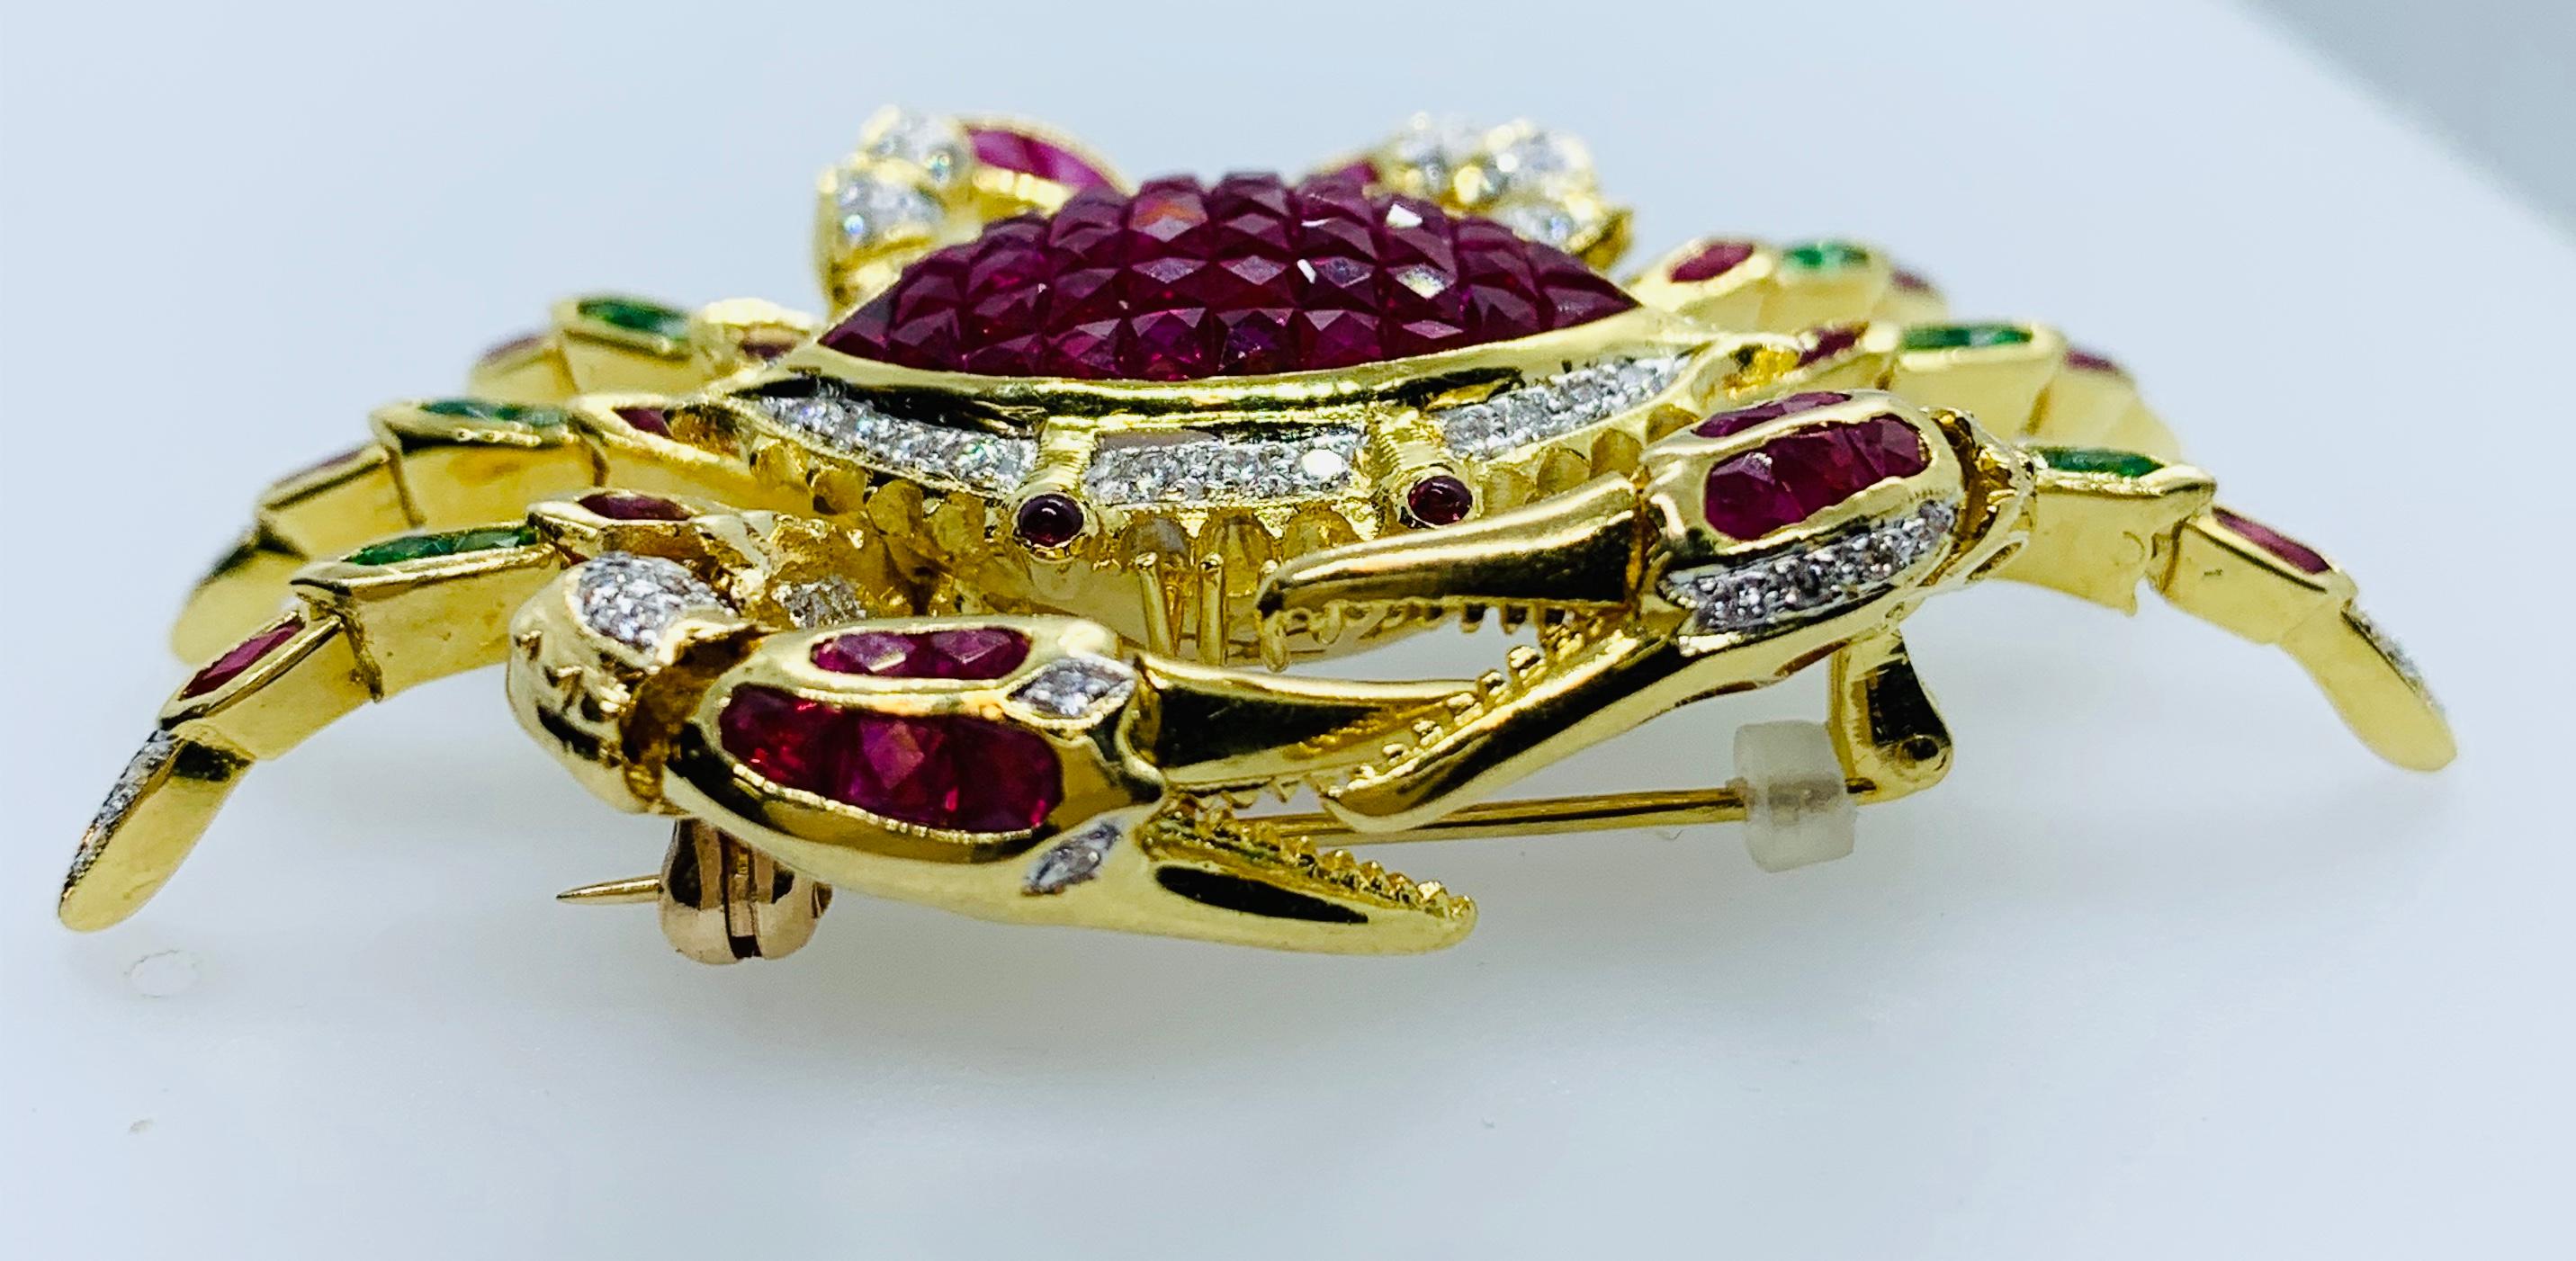 Stunning Crab Brooch! This piece is made in 18K yellow Gold this piece features French Cut Rubies and Diamonds for the crab's body, ruby eyes, ruby, diamond and emerald legs and ruby and diamond pinchers! This piece is so shiny and bright.... the